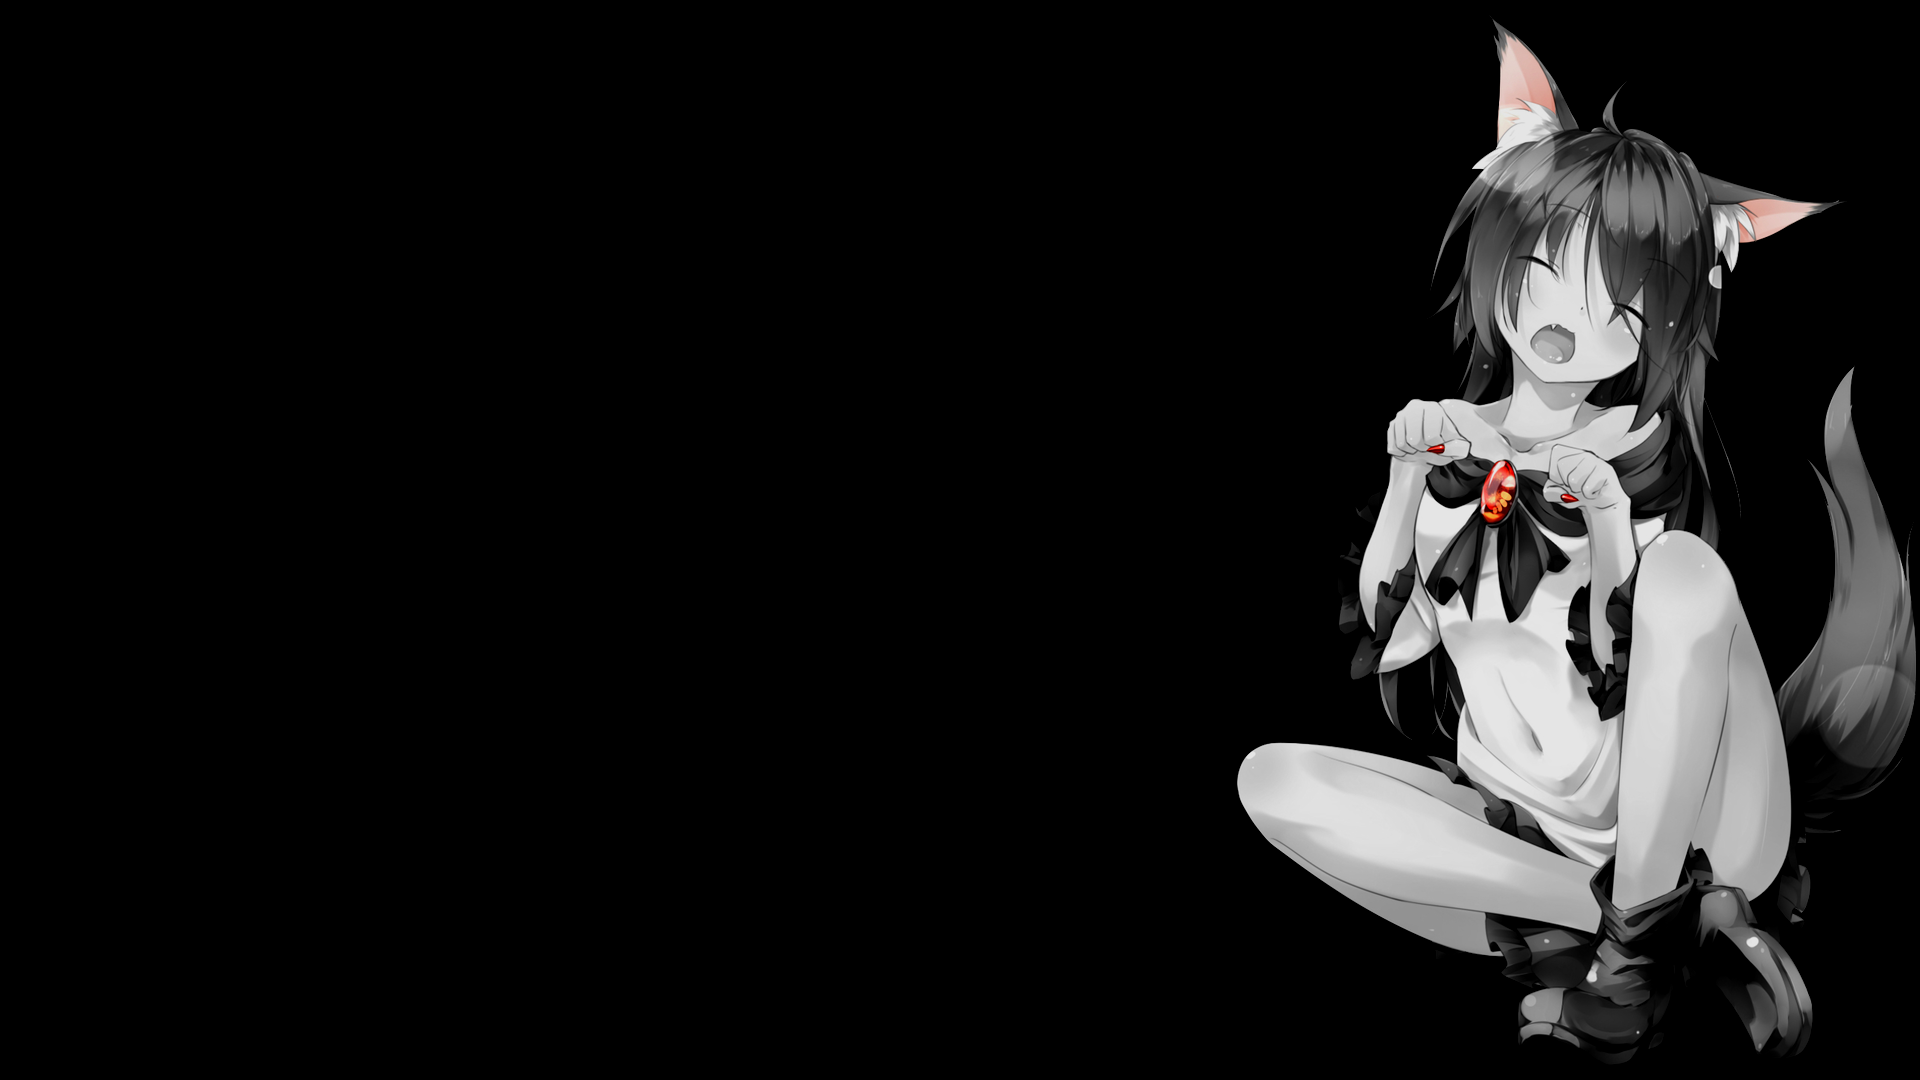 Anime Girls Black Background Dark Background Simple Background Selective  Coloring Fox Ears Fox Girl Wallpaper - Resolution:1920x1080 - ID:1311648 -  